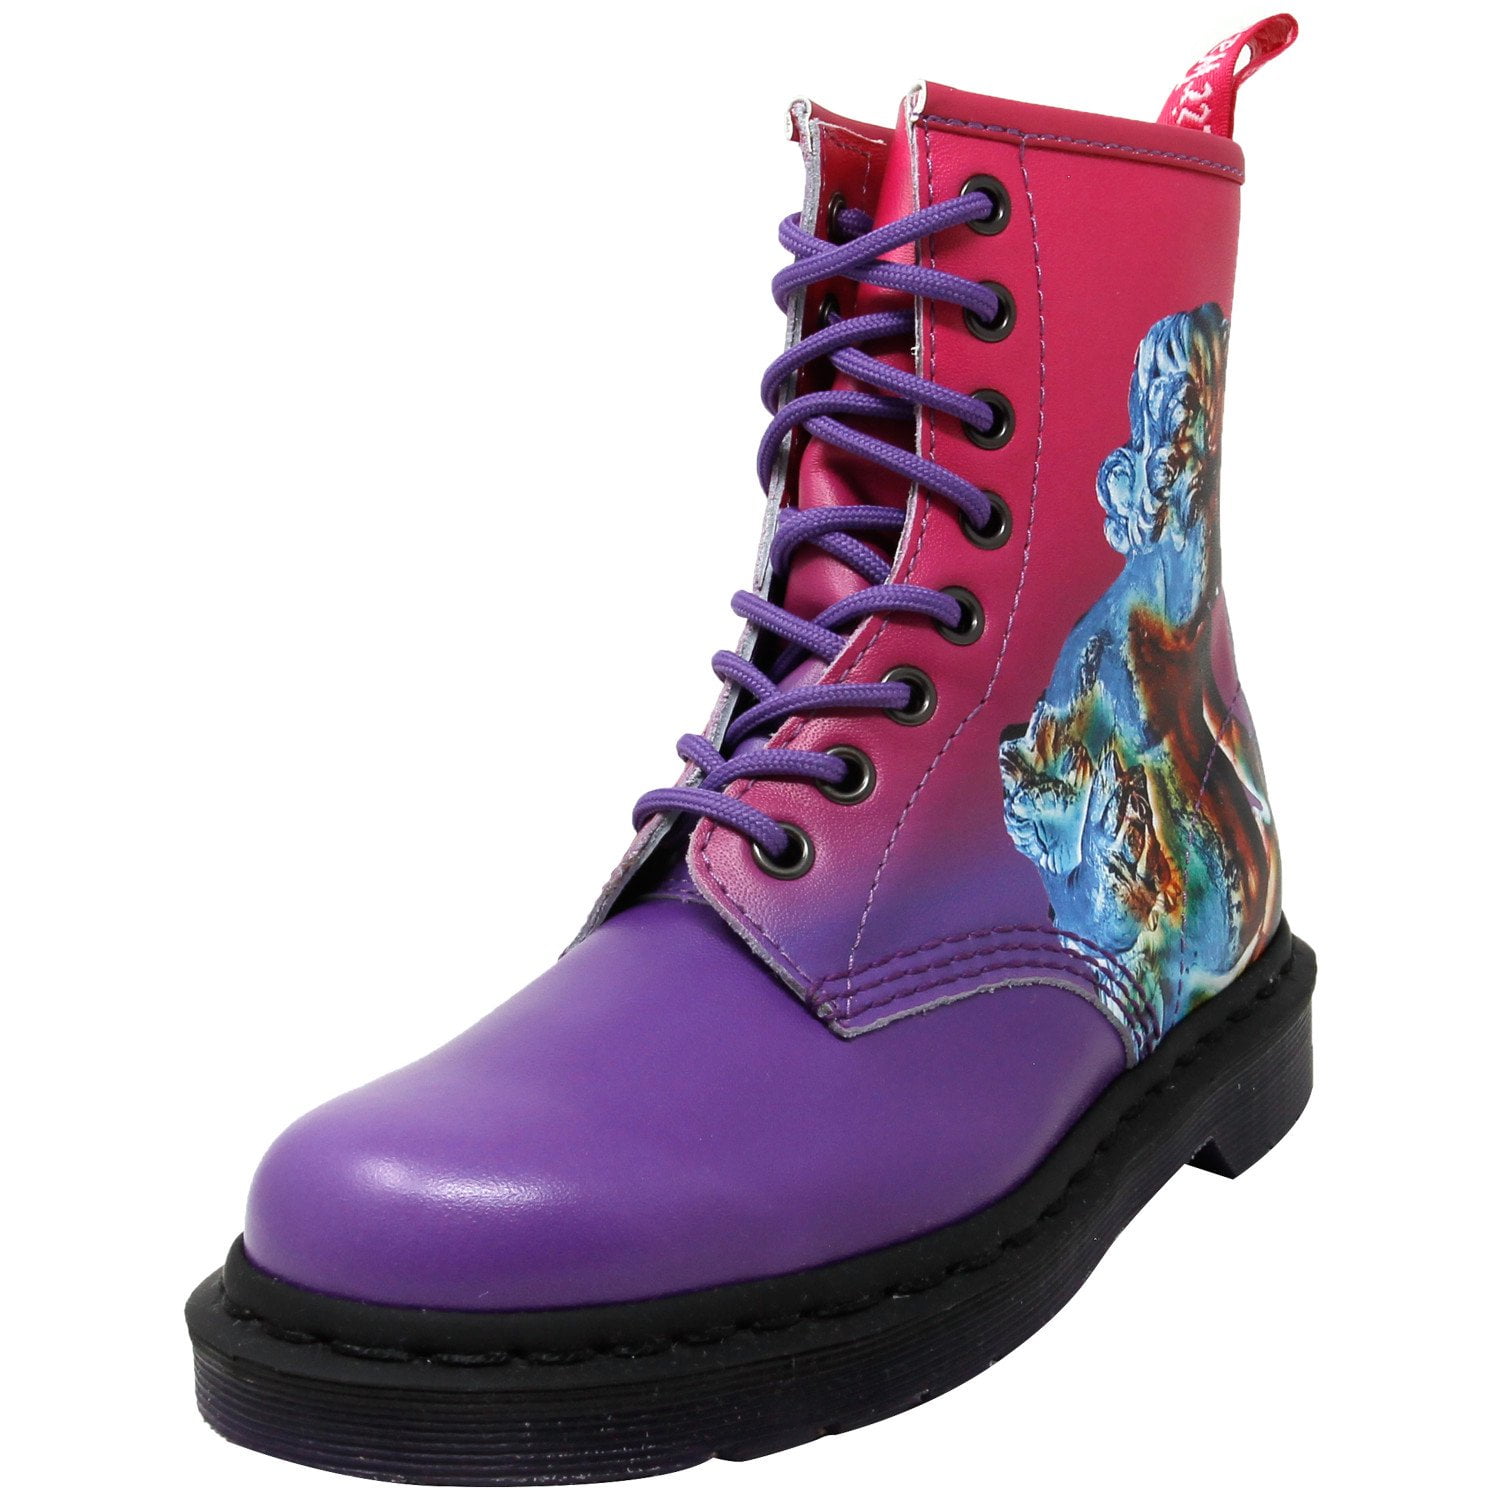  Dr. Martens 1460 Originals 8-Eye, Unisex, Black, Soft Toe, Slip  Resistant, 6 Inch Boot (8.0 MW) : Clothing, Shoes & Jewelry